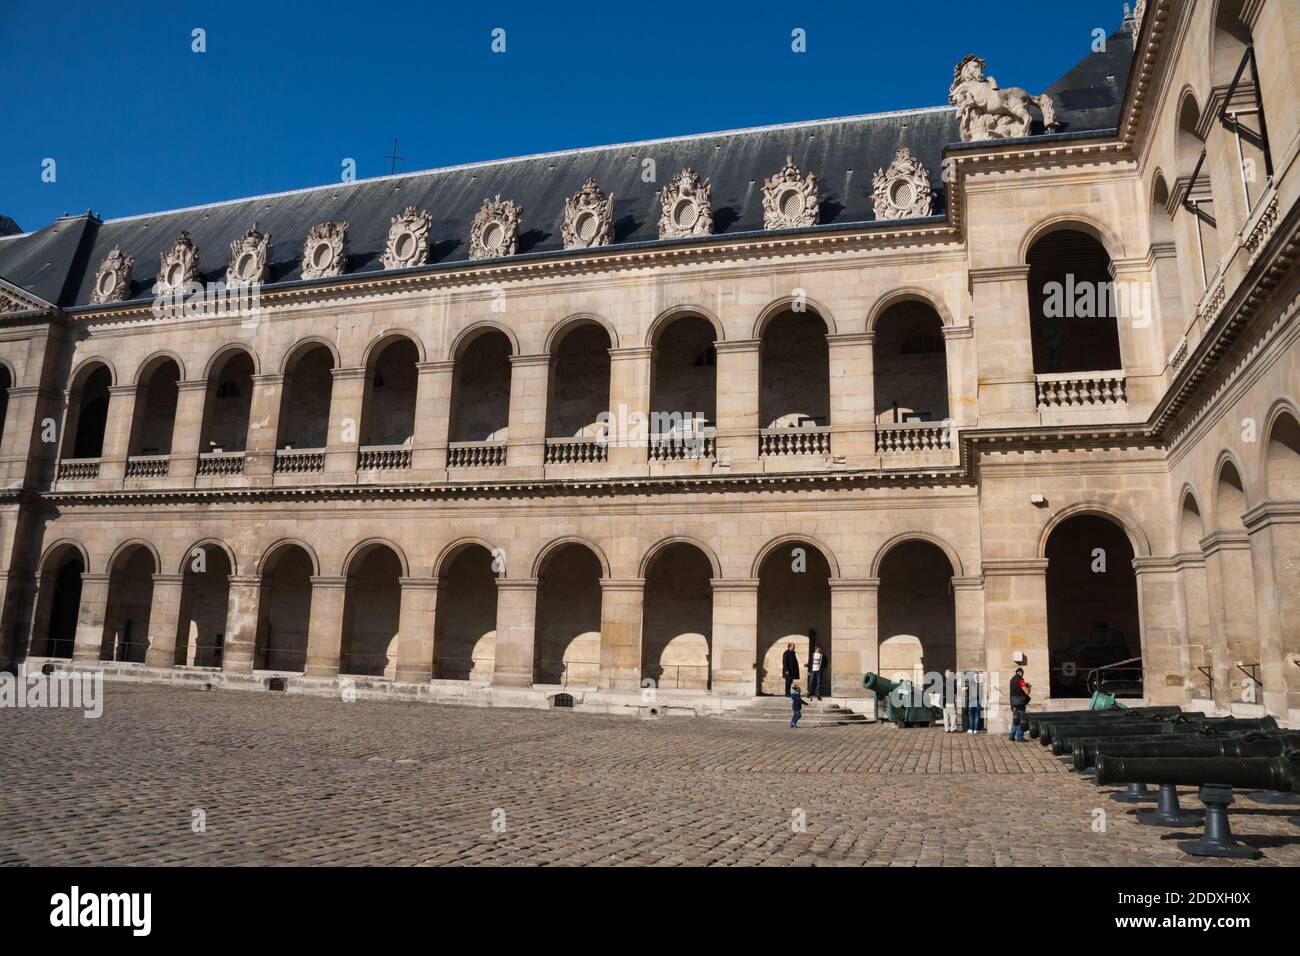 Paris, France Sept 27 2015: Courtyard at Hotel les Invalides (Invalids Residence) and the Army Museum with tourists and cannons. Stock Photo